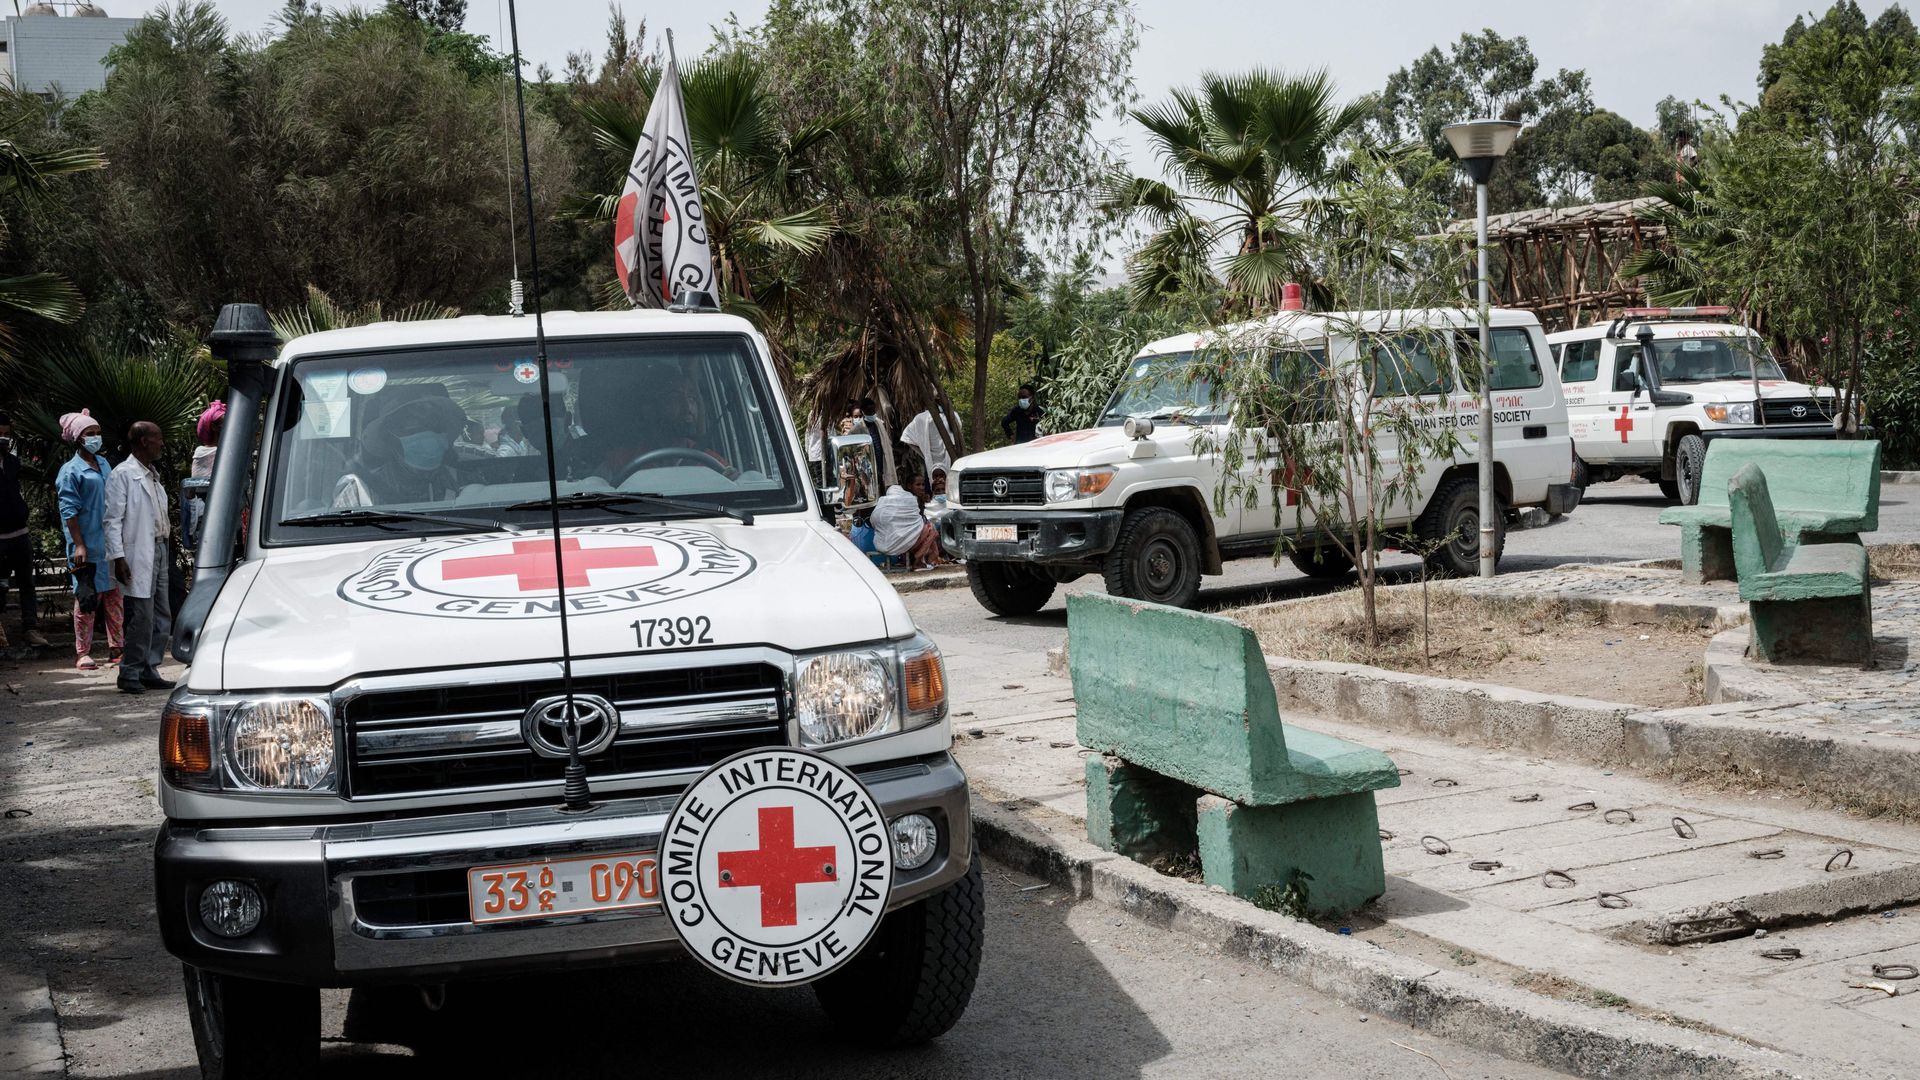 Ambulances of Red Cross arrive with patients who were injured in their town Togoga in a deadly airstrike on a market, arrive at Mekelle General Hospital in Mekele, on June 24, 2021.